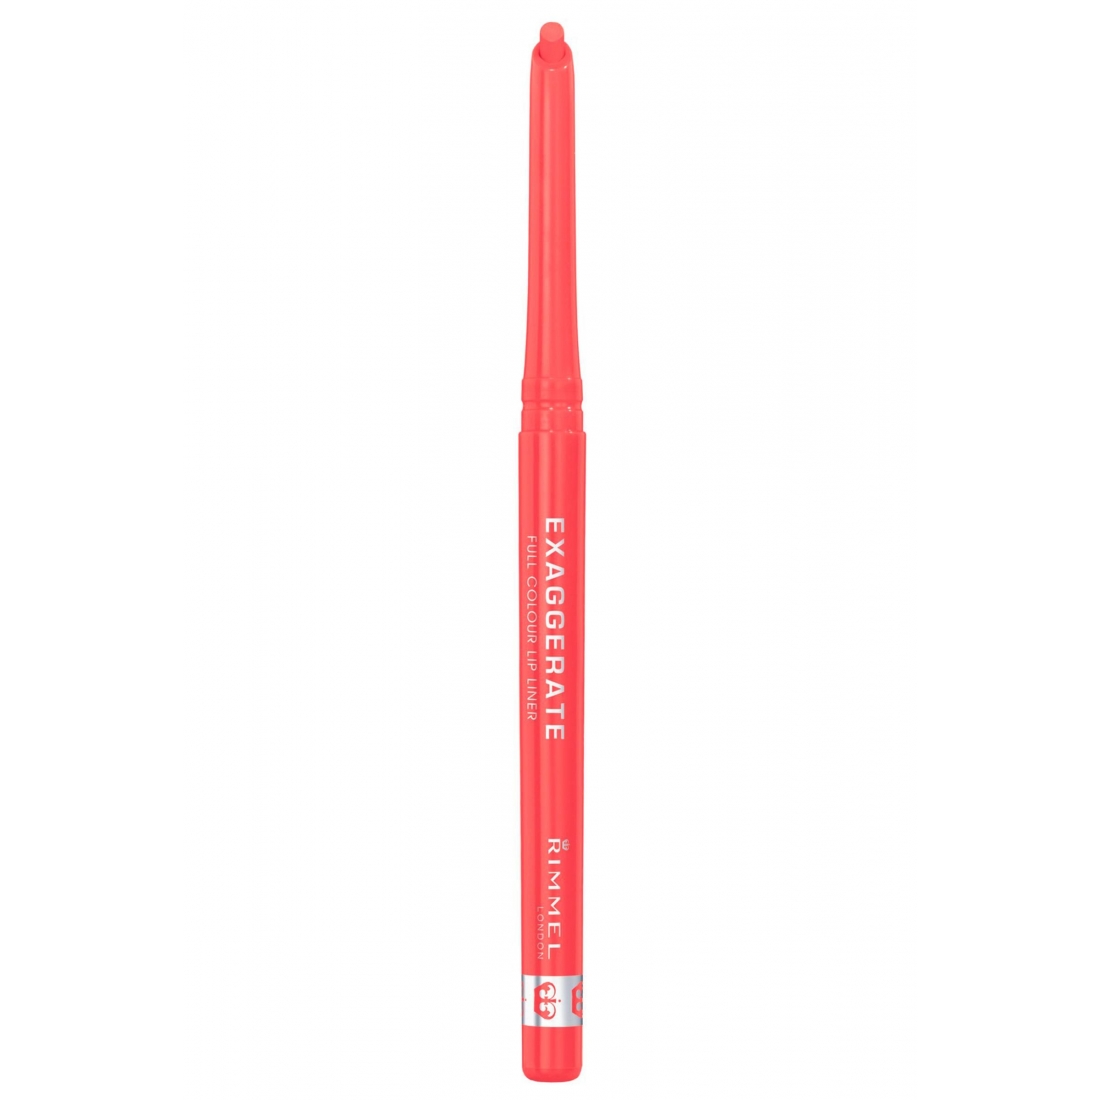 'Exaggerate Automatic' Lip Liner - 102 Peachy Beachy 0.25 g